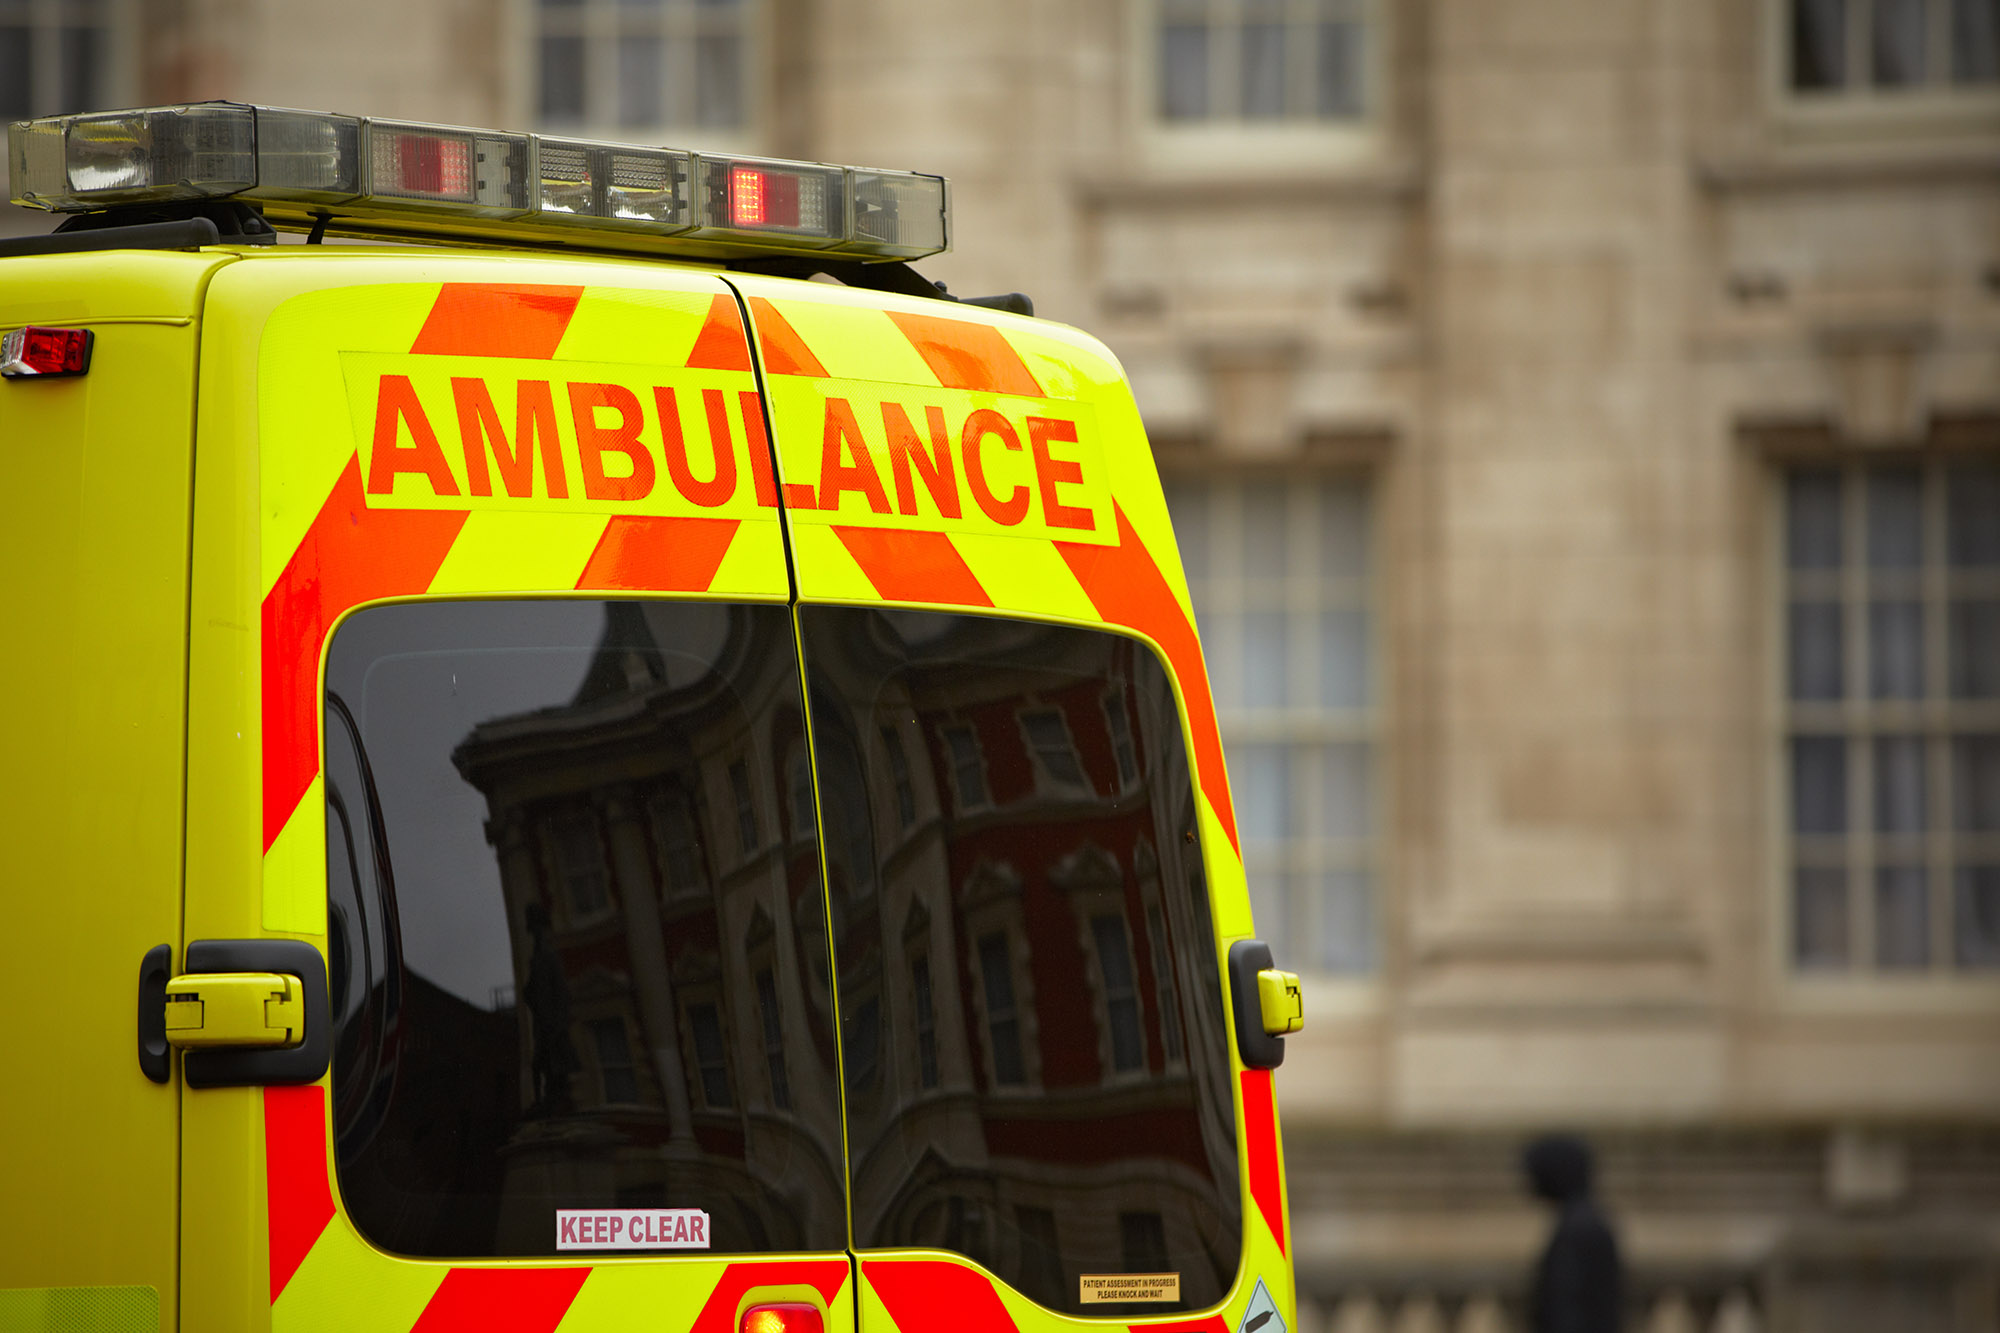 Ambulance, personal injury solicitors Southampton, accident claim managers